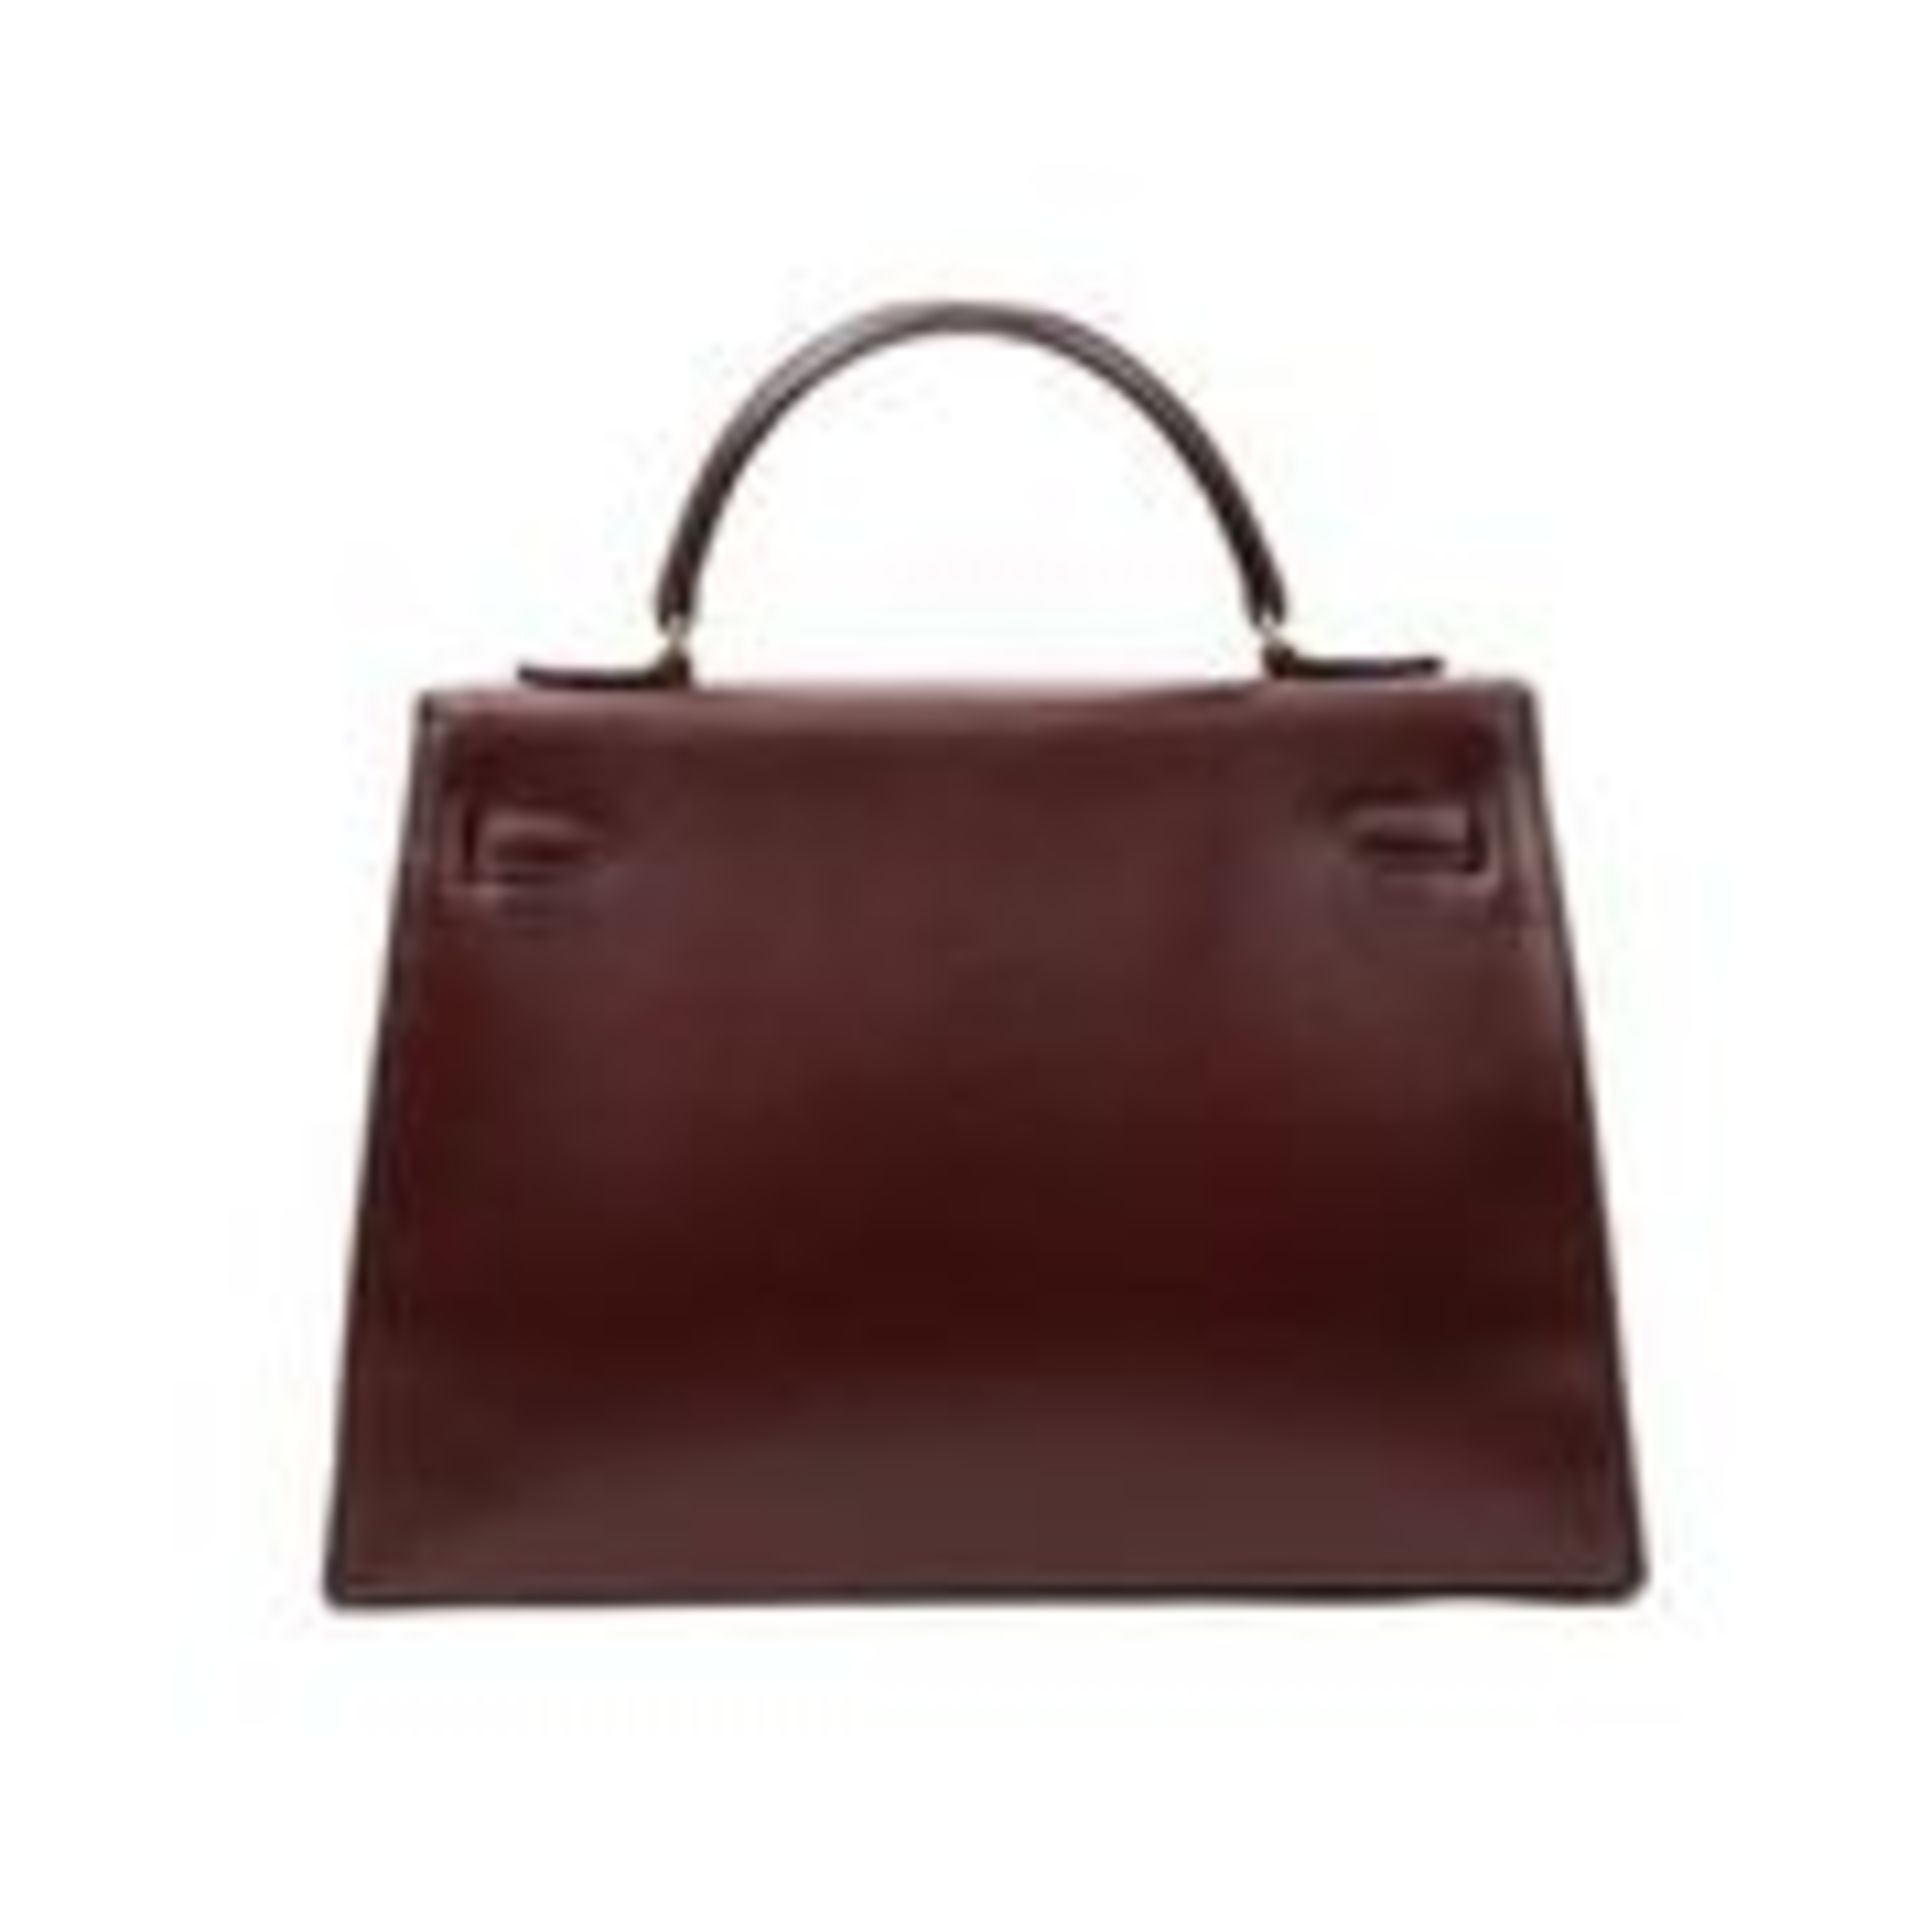 Vintage Hermes Kelly Handbag Wine - EAG5137 - Grade AB - Please Contact Us Directly For Shipping - Image 2 of 5